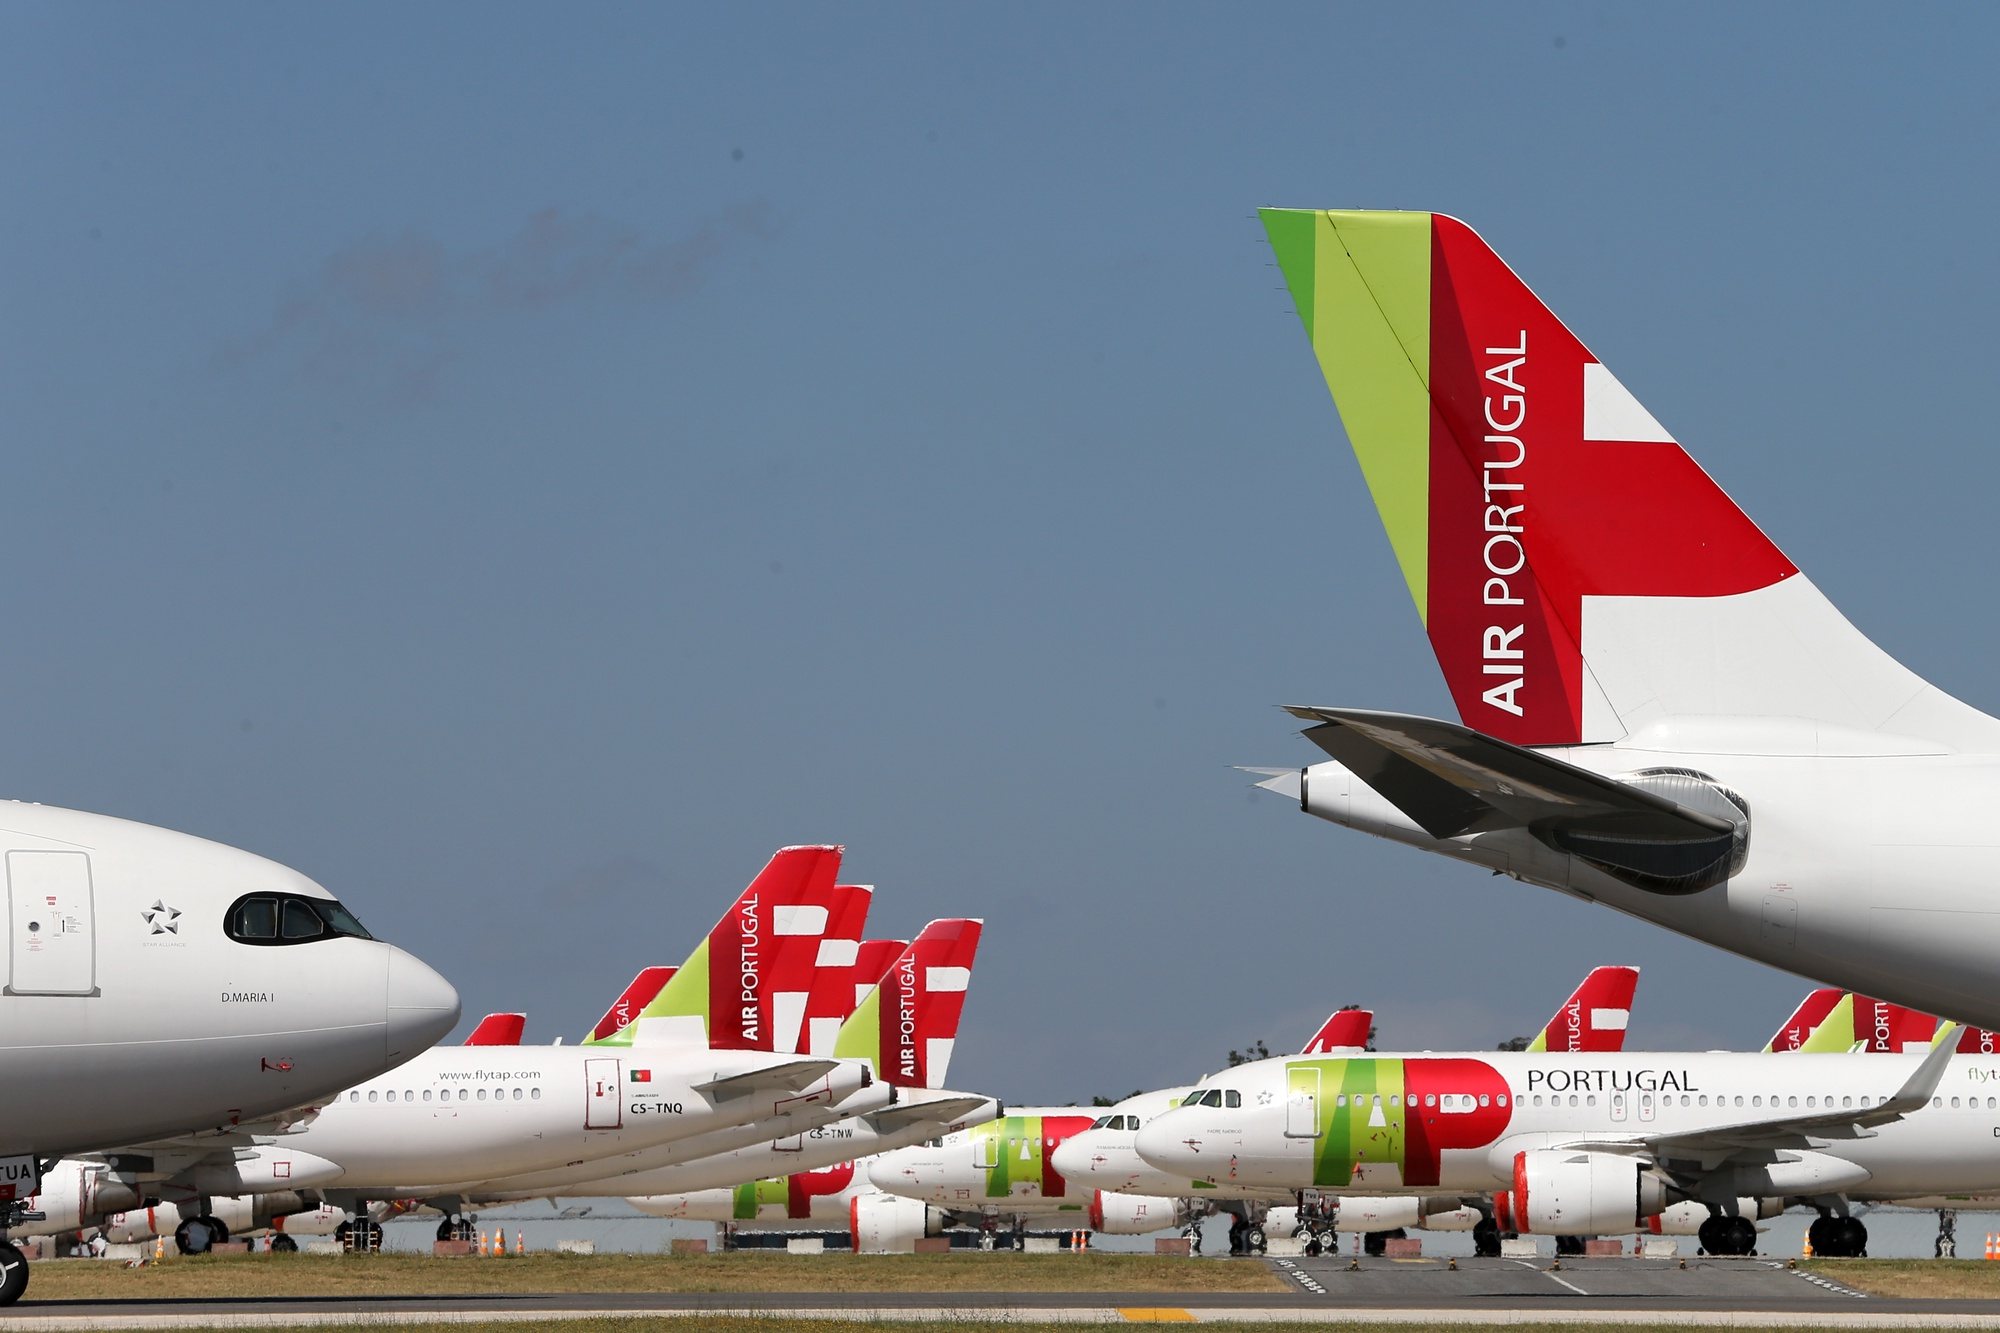 File photo dated from 09 April 2020 of TAP Air Portugal aircraft grounded at Humberto Delgado airport closed for passenger traffic as part of the exceptional traffic measures to combat the epidemiological situation of Covid-19, in Lisbon, Portugal, 09 April 2020 (reissued 02 July 2020). The granting of state support to TAP has been under discussion since the airline&#039;s activity came to a standstill because of the coronavirus pandemic, with an agreed injection of up to 1,200 million euros. MARIO CRUZ/LUSA